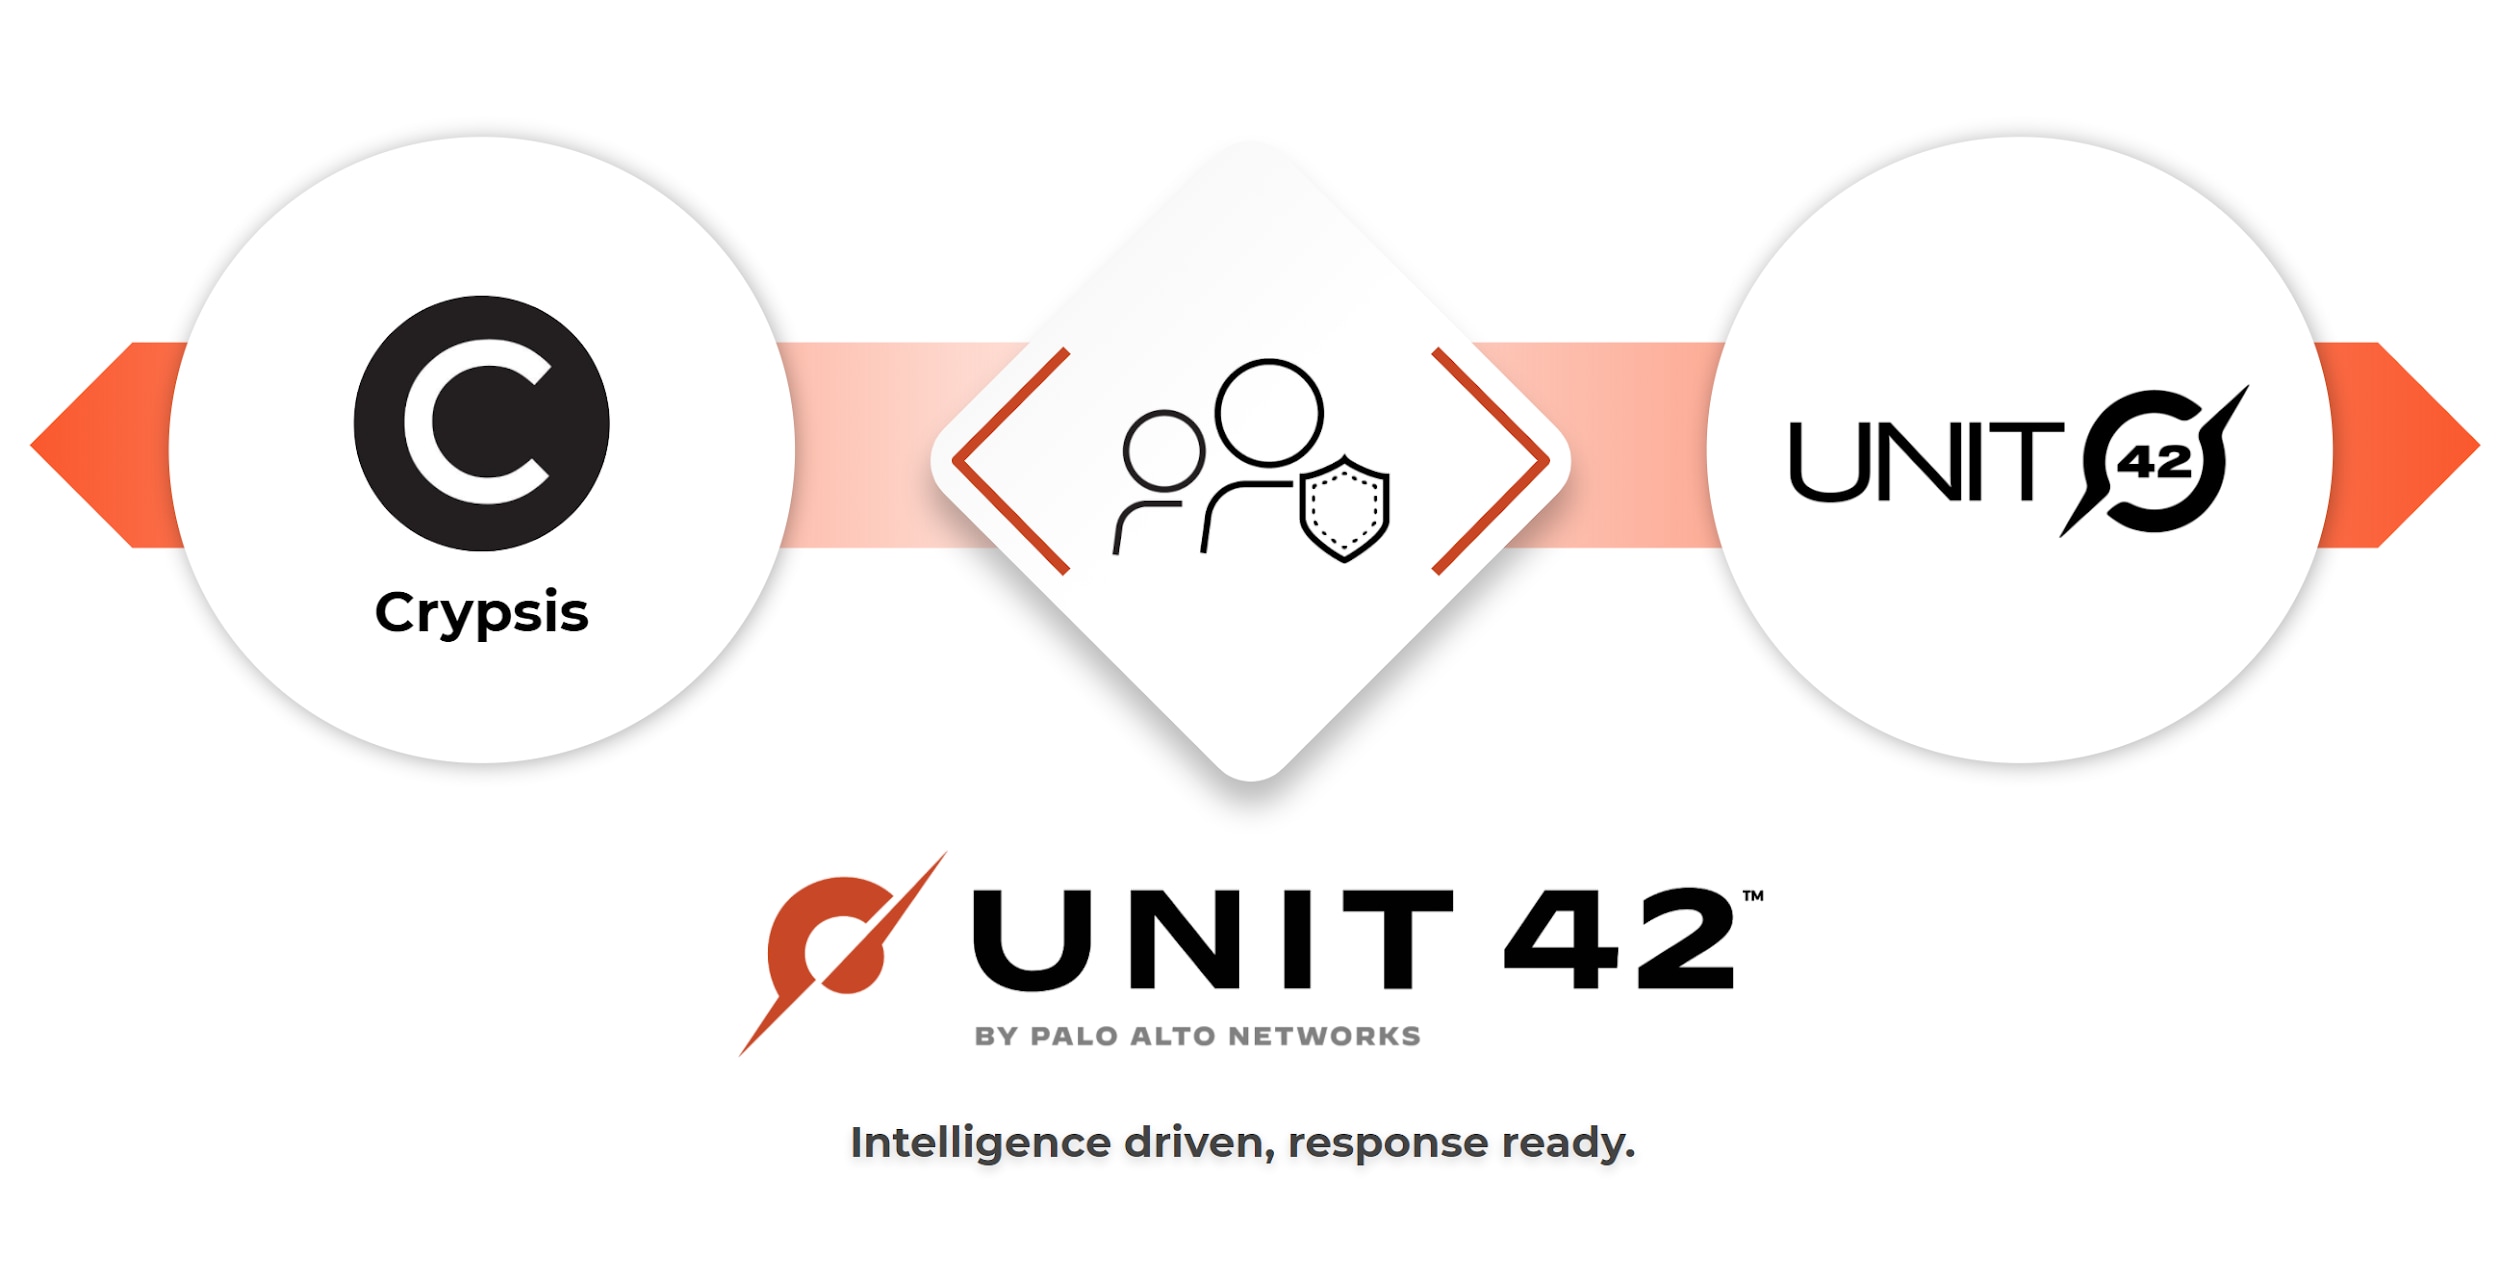 The image shows the Crypsis and Unit 42 logos and how they've merged into the new Unit 42 - "Intelligence driven, response ready." The combination brings together threat intelligence and incident response. 